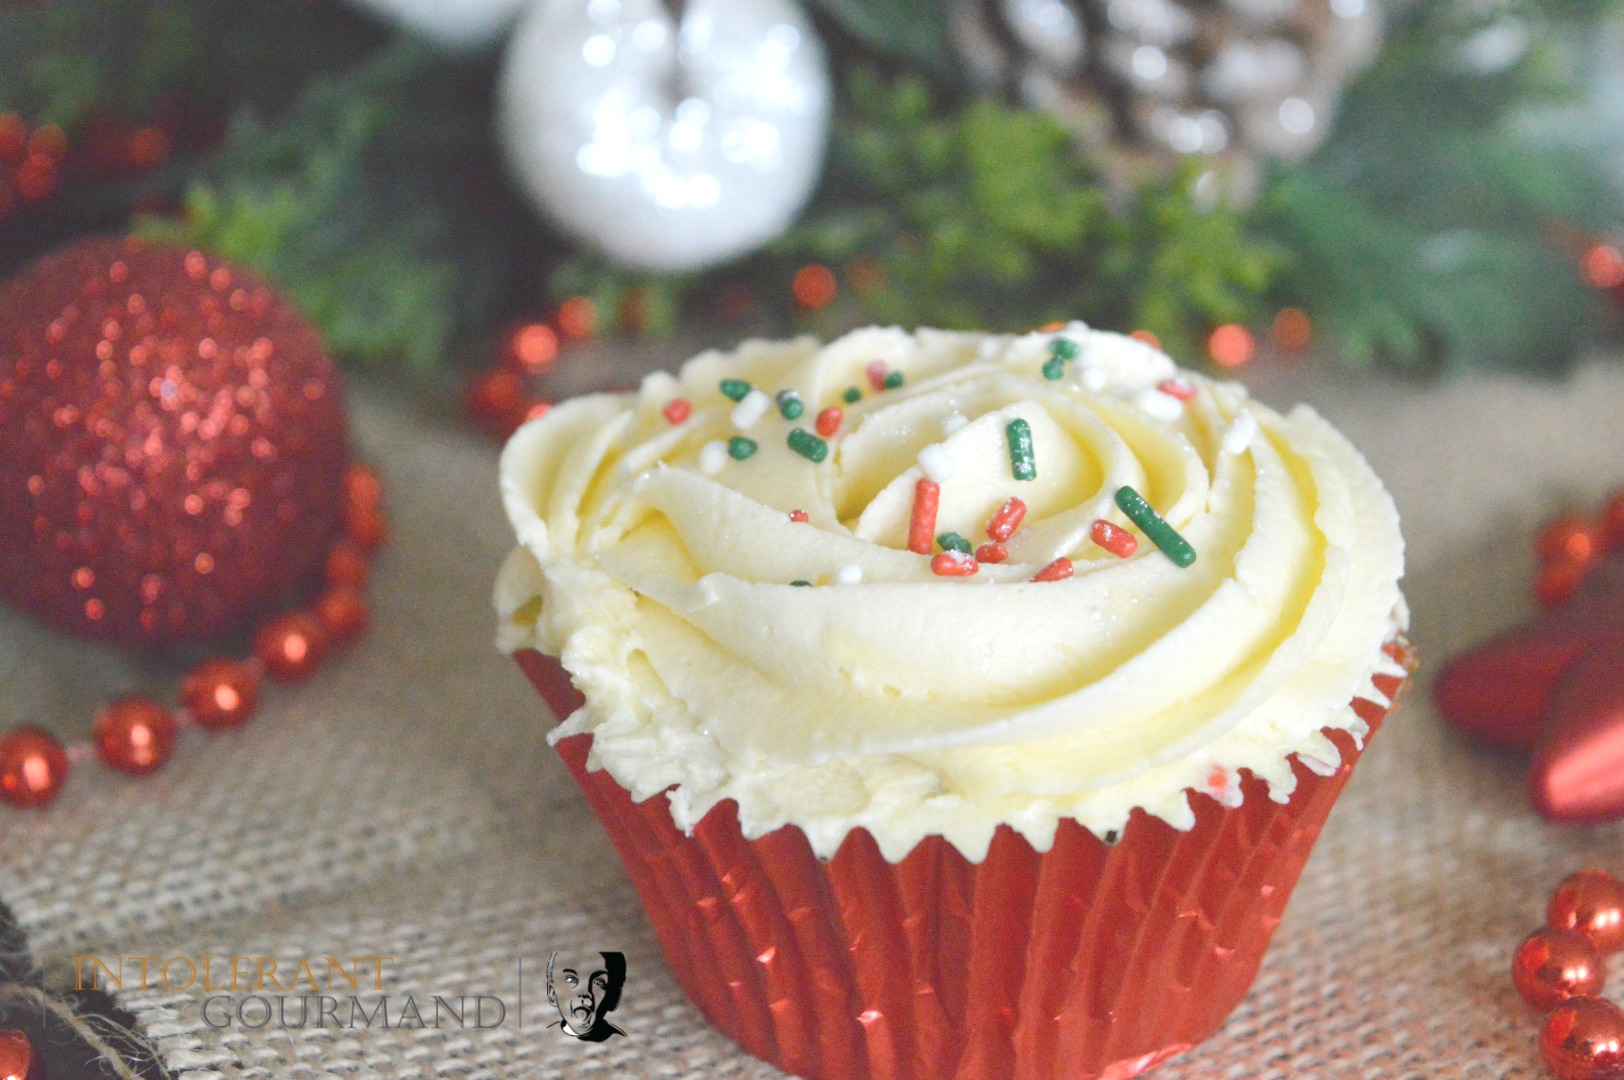 Simple Mince Pie Cupcakes - a delicious new take on the classic cupcake, given a festive twist! Quick and simple to make and dairy-free, gluten-free, wheat-free, egg-free, nut-free and more and still super tasty! www.intolerantgourmand.com